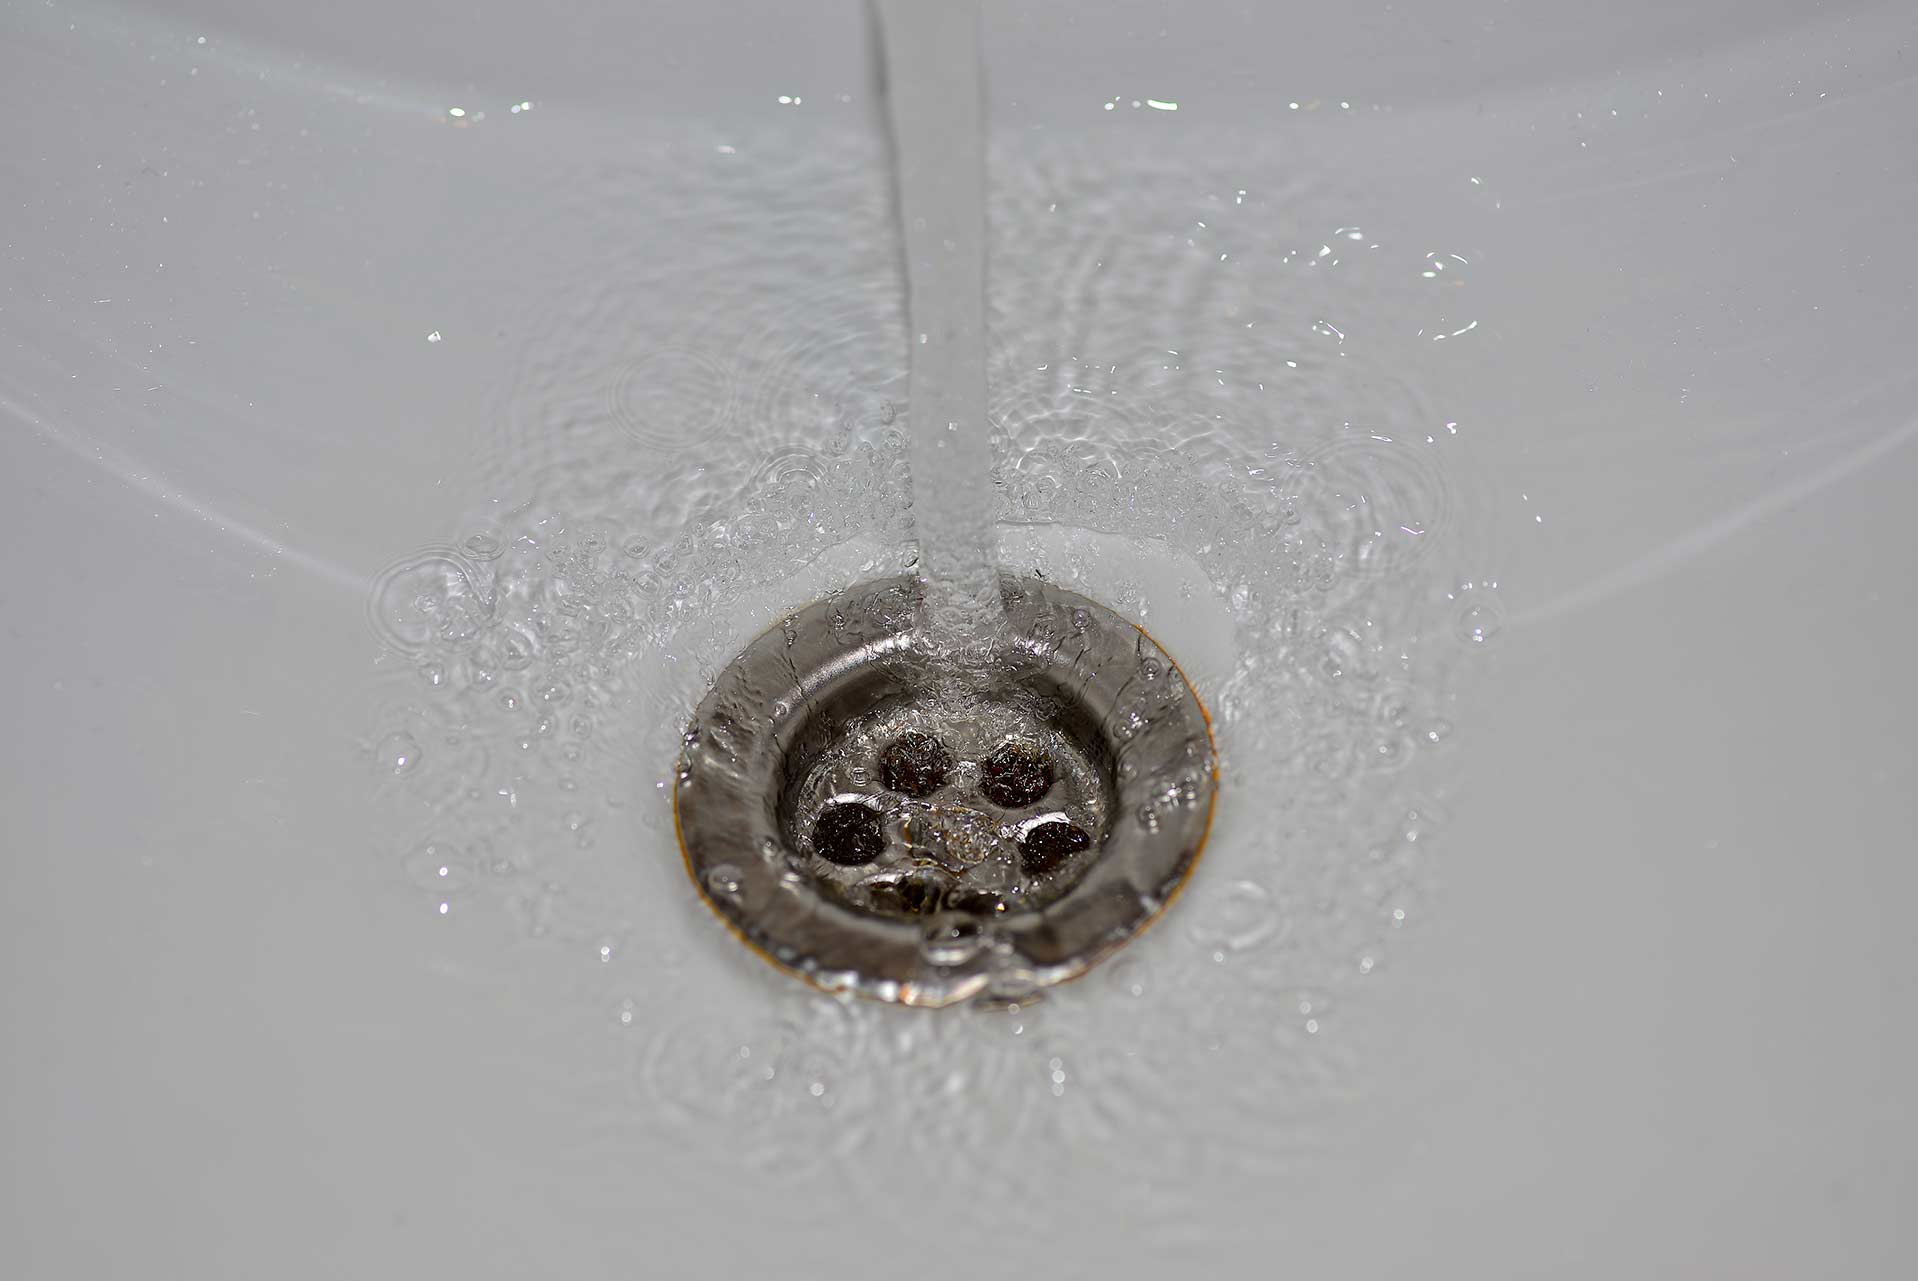 A2B Drains provides services to unblock blocked sinks and drains for properties in Scunthorpe.